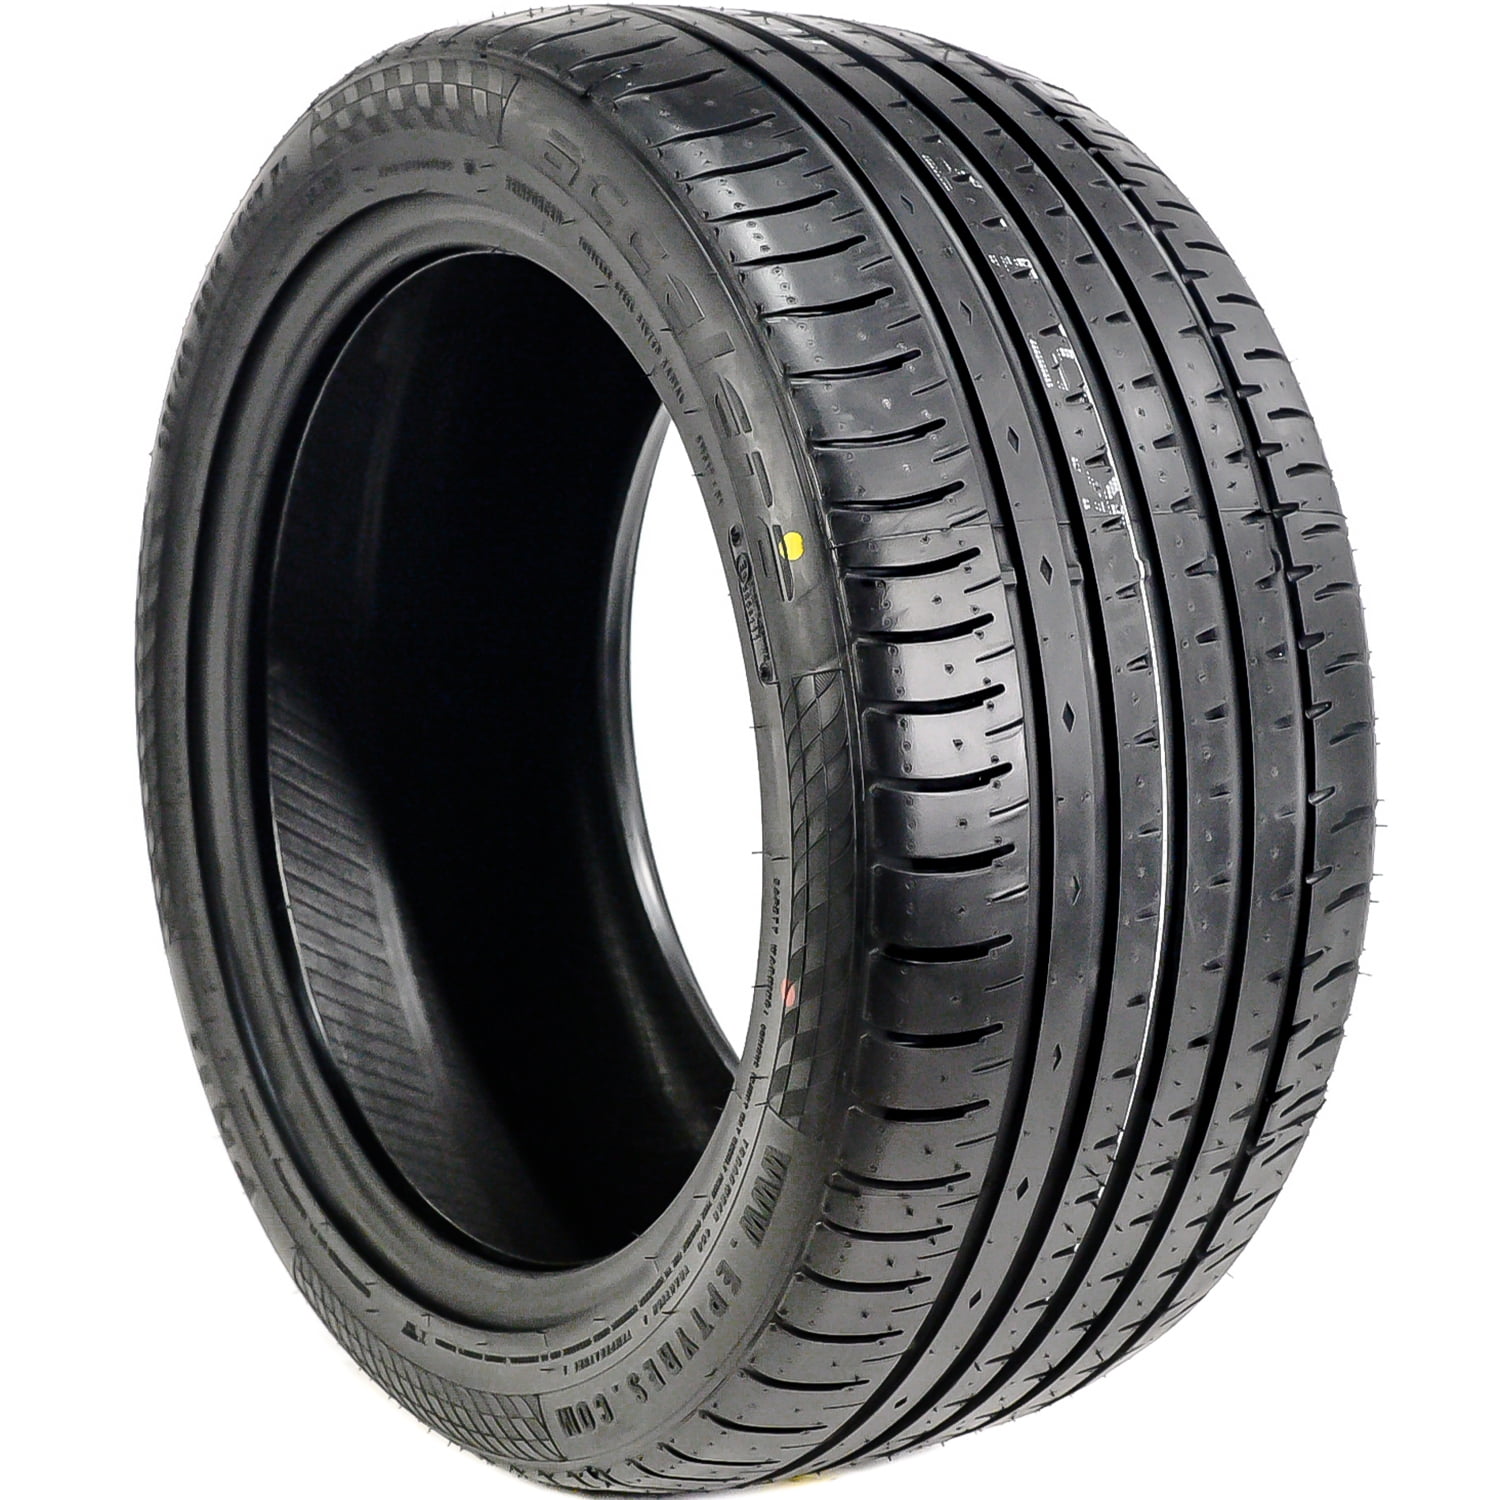 2x275/40ZR19 105Y XL ACCELERA NEW TYRE'S FREE FITTING OR FREE POSTAGE,2754019 